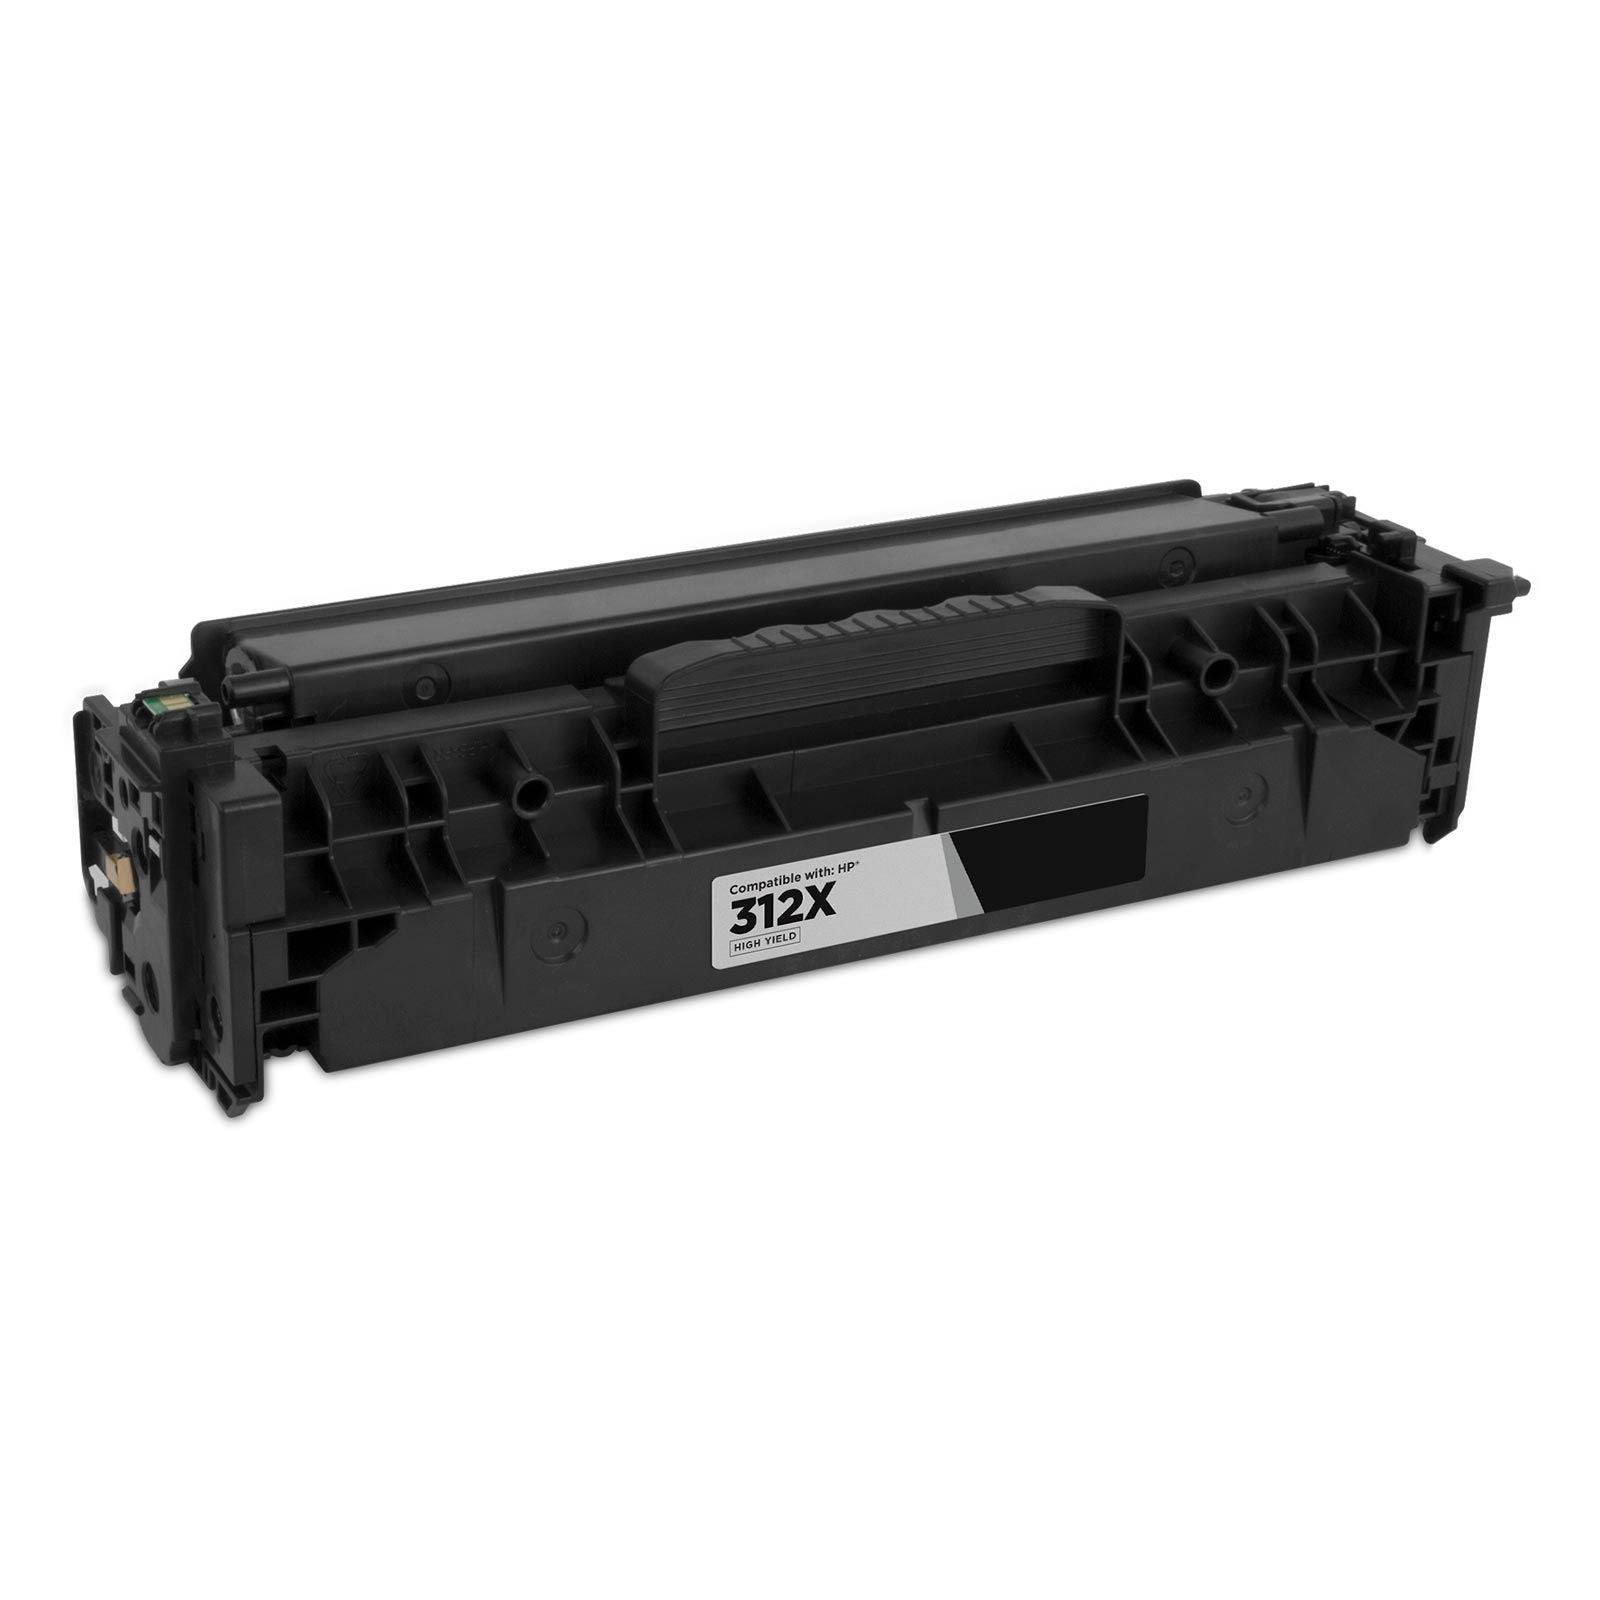 IMPERIAL BRAND Compatible toner cartridge for HP BLACK 312X TONER 4,400 PAGES